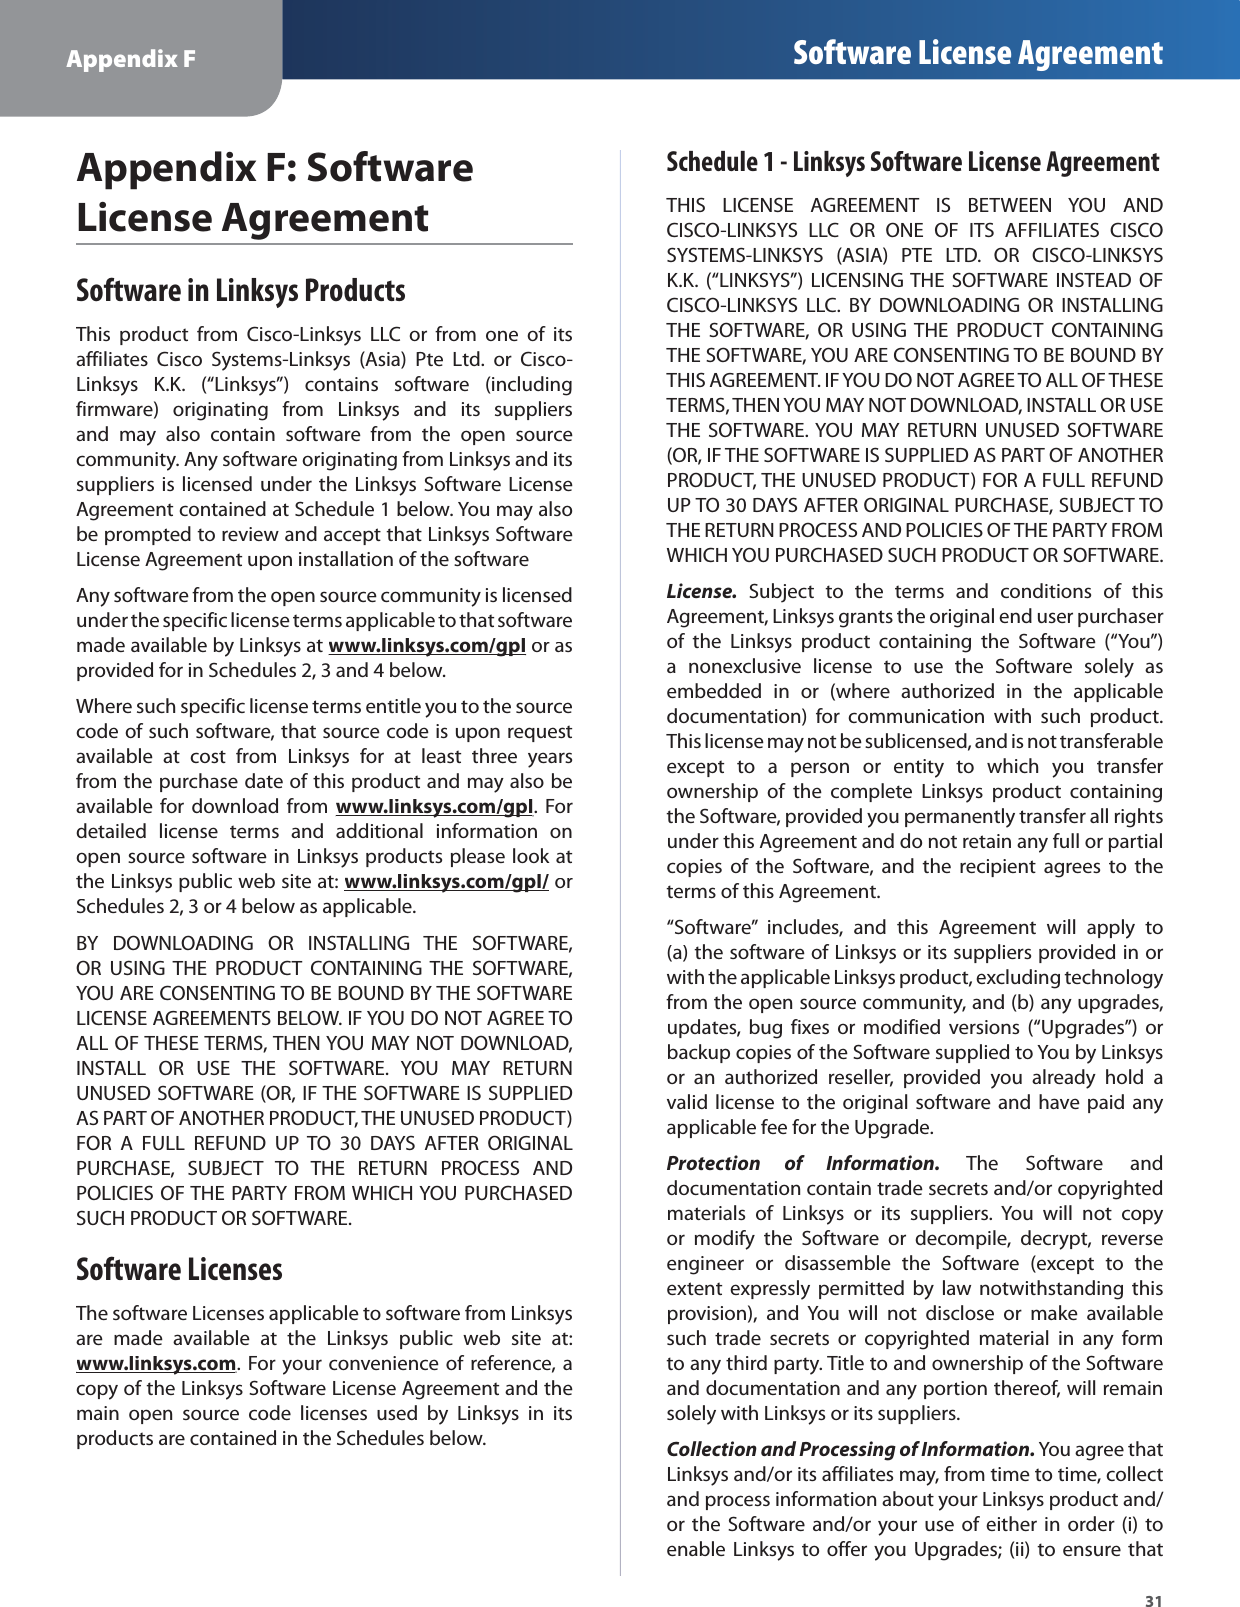 31Appendix F Software License AgreementAppendix F: Software License AgreementSoftware in Linksys ProductsThis product from Cisco-Linksys LLC or from one of itsaffiliates Cisco Systems-Linksys (Asia) Pte Ltd. or Cisco-Linksys K.K. (“Linksys”) contains software (includingfirmware) originating from Linksys and its suppliersand may also contain software from the open sourcecommunity. Any software originating from Linksys and itssuppliers is licensed under the Linksys Software LicenseAgreement contained at Schedule 1 below. You may alsobe prompted to review and accept that Linksys SoftwareLicense Agreement upon installation of the softwareAny software from the open source community is licensedunder the specific license terms applicable to that softwaremade available by Linksys atwww.linksys.com/gplygp or asprovided for in Schedules 2, 3 and 4 below.Where such specific license terms entitle you to the sourcecode of such software, that source code is upon requestavailable at cost from Linksys for at least three yearsfrom the purchase date of this product and may also beavailable for download fromwww.linksys.com/gplygp. Fordetailed license terms and additional information onopen source software in Linksys products please look atthe Linksys public web site at:www.linksys.com/gpl/ygporSchedules 2, 3 or 4 below as applicable.BY DOWNLOADING OR INSTALLING THE SOFTWARE,OR USING THE PRODUCT CONTAINING THE SOFTWARE,YOU ARE CONSENTING TO BE BOUND BY THE SOFTWARELICENSE AGREEMENTS BELOW. IF YOU DO NOT AGREE TOALL OF THESE TERMS, THEN YOU MAY NOT DOWNLOAD,INSTALL OR USE THE SOFTWARE. YOU MAY RETURNUNUSED SOFTWARE (OR, IF THE SOFTWARE IS SUPPLIEDAS PART OF ANOTHER PRODUCT, THE UNUSED PRODUCT)FOR A FULL REFUND UP TO 30 DAYS AFTER ORIGINALPURCHASE, SUBJECT TO THE RETURN PROCESS ANDPOLICIES OF THE PARTY FROM WHICH YOU PURCHASEDSUCH PRODUCT OR SOFTWARE.Software LicensesThe software Licenses applicable to software from Linksysare made available at the Linksys public web site at:www.linksys.comy. For your convenience of reference, acopy of the Linksys Software License Agreement and themain open source code licenses used by Linksys in itsproducts are contained in the Schedules below.Schedule 1 - Linksys Software License AgreementTHIS LICENSE AGREEMENT IS BETWEEN YOU ANDCISCO-LINKSYS LLC OR ONE OF ITS AFFILIATES CISCOSYSTEMS-LINKSYS (ASIA) PTE LTD. OR CISCO-LINKSYSK.K. (“LINKSYS”) LICENSING THE SOFTWARE INSTEAD OFCISCO-LINKSYS LLC. BY DOWNLOADING OR INSTALLINGTHE SOFTWARE, OR USING THE PRODUCT CONTAININGTHE SOFTWARE, YOU ARE CONSENTING TO BE BOUND BYTHIS AGREEMENT. IF YOU DO NOT AGREE TO ALL OF THESETERMS, THEN YOU MAY NOT DOWNLOAD, INSTALL OR USETHE SOFTWARE. YOU MAY RETURN UNUSED SOFTWARE(OR, IF THE SOFTWARE IS SUPPLIED AS PART OF ANOTHERPRODUCT, THE UNUSED PRODUCT) FOR A FULL REFUNDUP TO 30 DAYS AFTER ORIGINAL PURCHASE, SUBJECT TOTHE RETURN PROCESS AND POLICIES OF THE PARTY FROMWHICH YOU PURCHASED SUCH PRODUCT OR SOFTWARE.License.Subject to the terms and conditions of thisAgreement, Linksys grants the original end user purchaserof the Linksys product containing the Software (“You”)a nonexclusive license to use the Software solely asembedded in or (where authorized in the applicabledocumentation) for communication with such product.This license may not be sublicensed, and is not transferableexcept to a person or entity to which you transferownership of the complete Linksys product containingthe Software, provided you permanently transfer all rightsunder this Agreement and do not retain any full or partialcopies of the Software, and the recipient agrees to theterms of this Agreement.“Software” includes, and this Agreement will apply to(a)the software of Linksys or its suppliers provided in orwith the applicable Linksys product, excluding technologyfrom the open source community, and (b) any upgrades,updates, bug fixes or modified versions (“Upgrades”) orbackup copies of the Software supplied to You by Linksysor an authorized reseller, provided you already hold avalid license to the original software and have paid anyapplicable fee for the Upgrade.Protection of Information. The Software anddocumentation contain trade secrets and/or copyrightedmaterials of Linksys or its suppliers. You will not copyor modify the Software or decompile, decrypt, reverseengineer or disassemble the Software (except to theextent expressly permitted by law notwithstanding thisprovision), and You will not disclose or make availablesuch trade secrets or copyrighted material in any formto any third party. Title to and ownership of the Softwareand documentation and any portion thereof, will remainsolely with Linksys or its suppliers.Collection and Processing of Information. You agree thatLinksys and/or its affiliates may, from time to time, collectand process information about your Linksys product and/or the Software and/or your use of either in order (i) toenable Linksys to offer you Upgrades; (ii) to ensure that